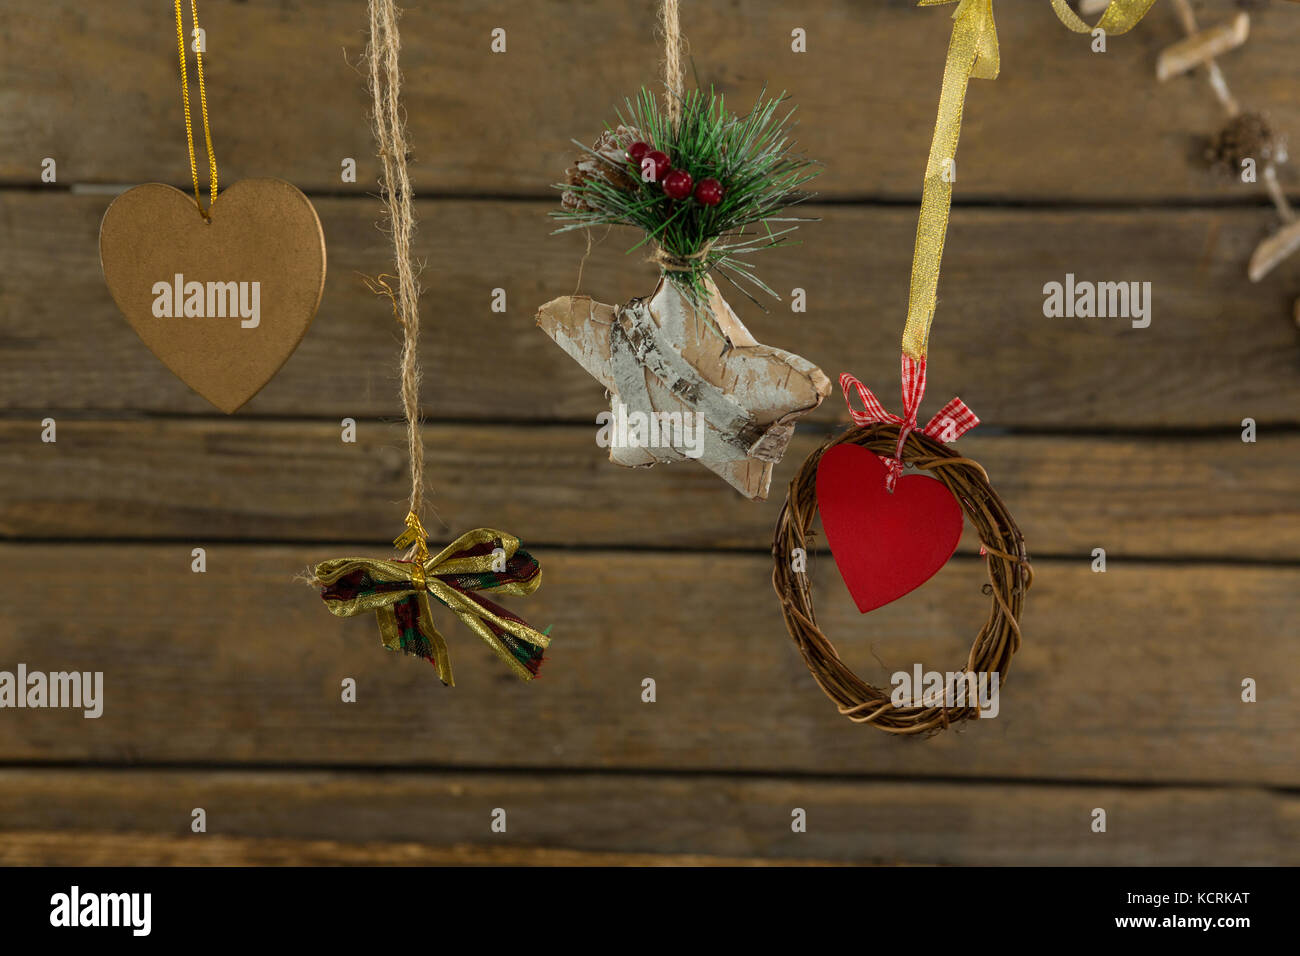 High angle view of Christmas decorations with thread against wooden table Stock Photo